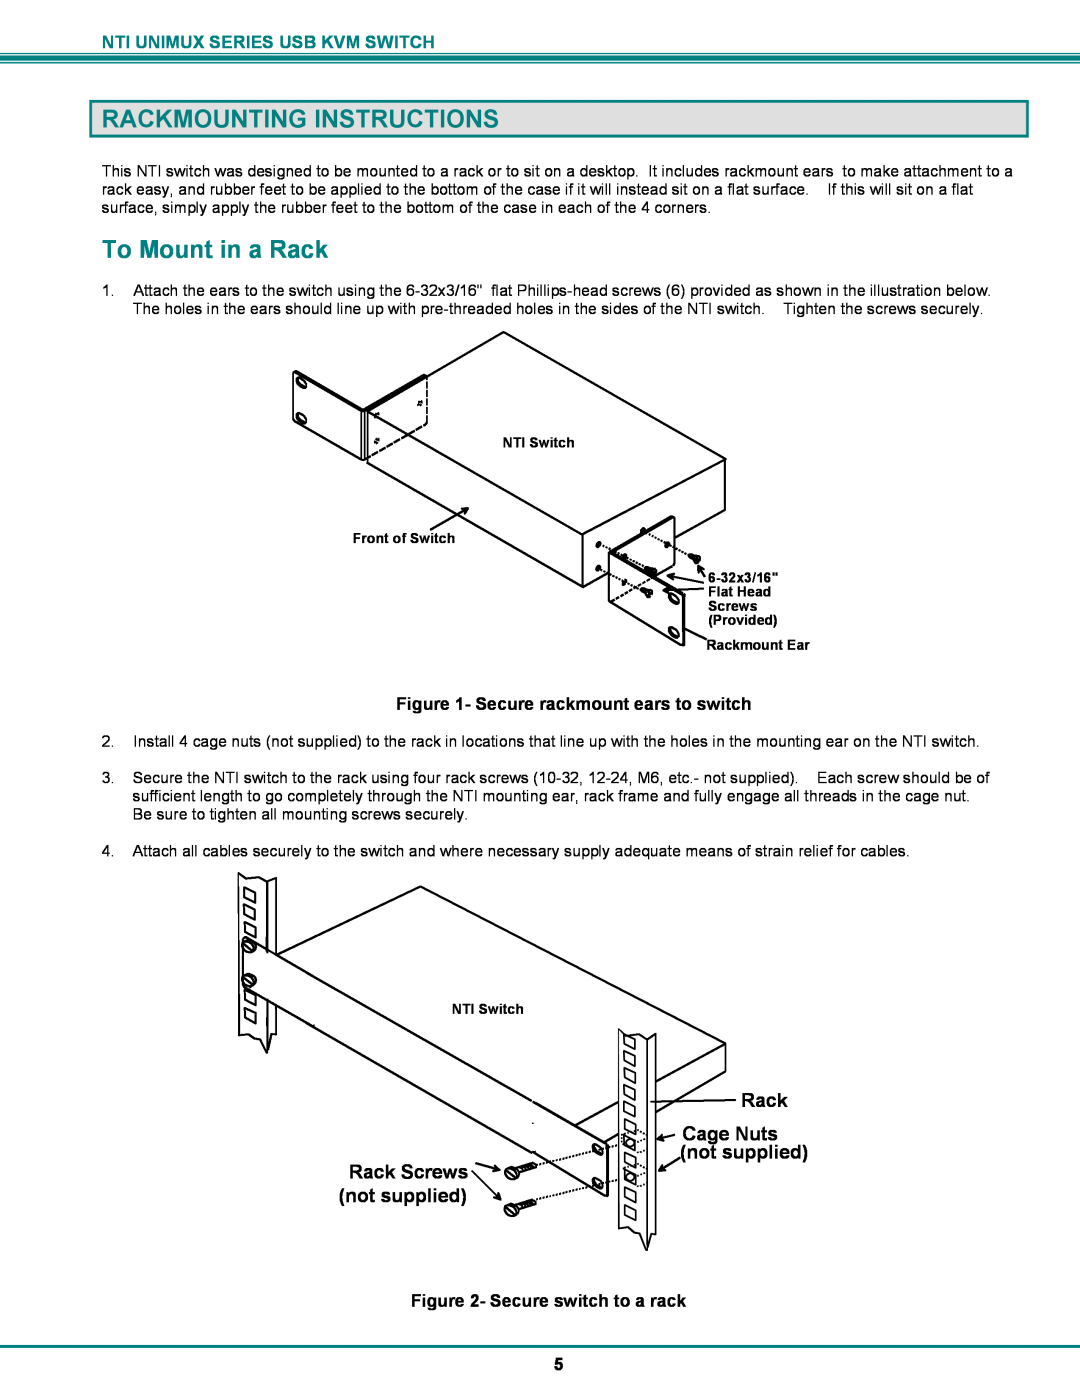 Network Technologies UNIMUX-DVI-xHD Rackmounting Instructions, To Mount in a Rack, Secure rackmount ears to switch 